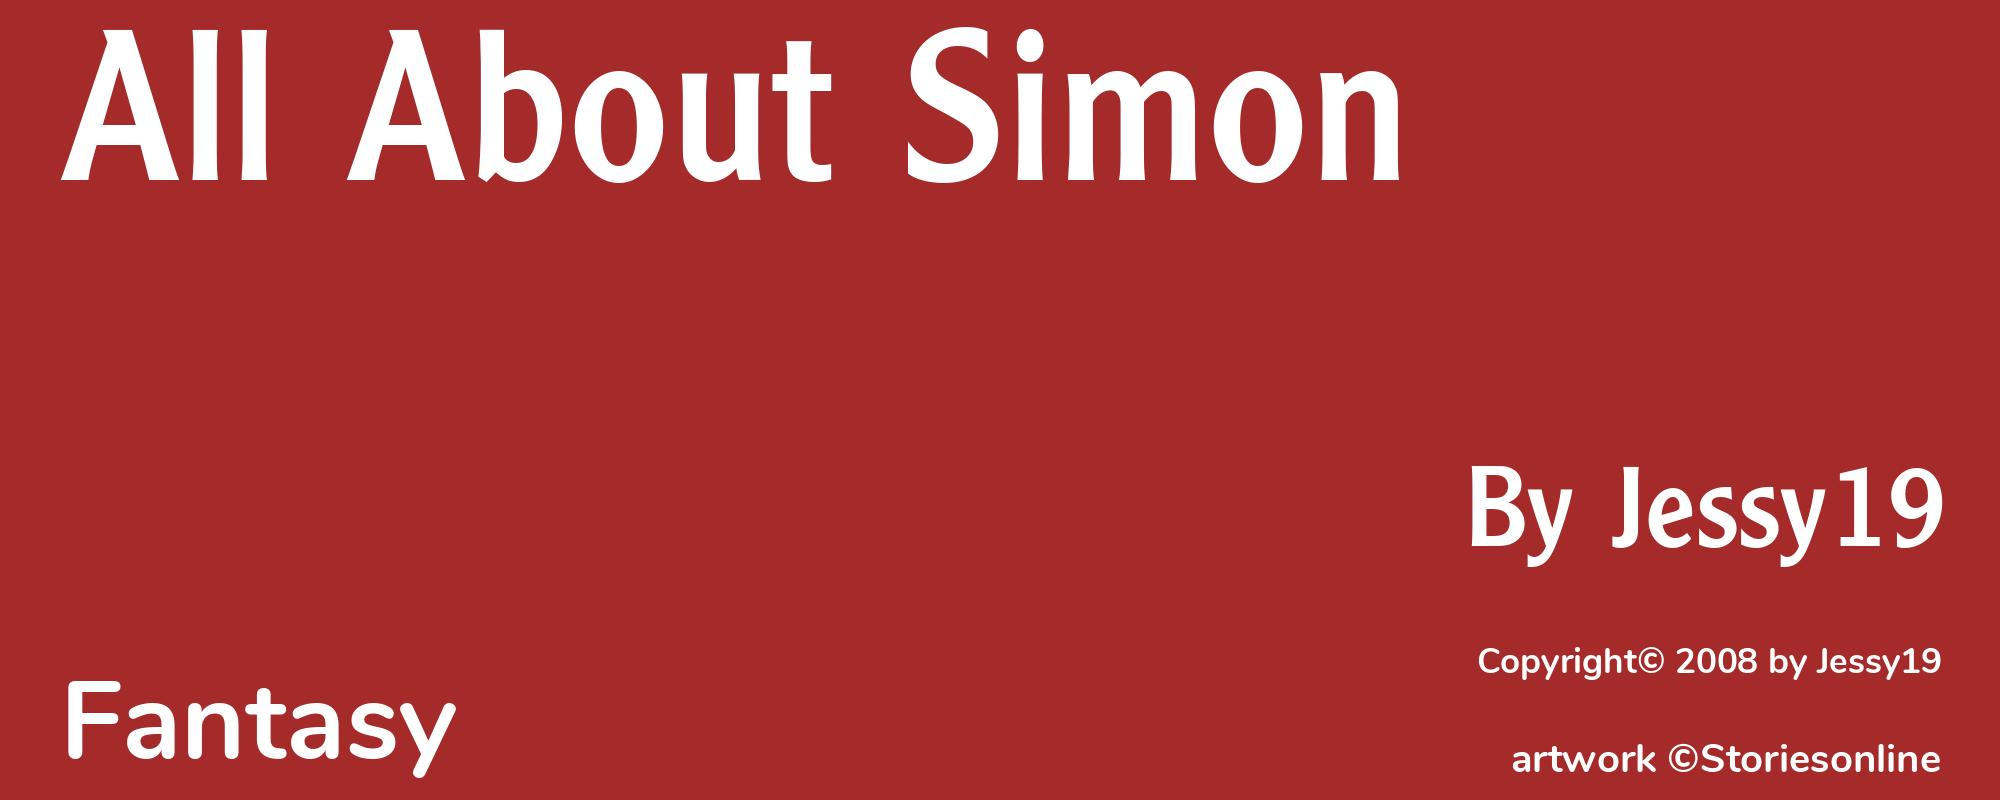 All About Simon - Cover